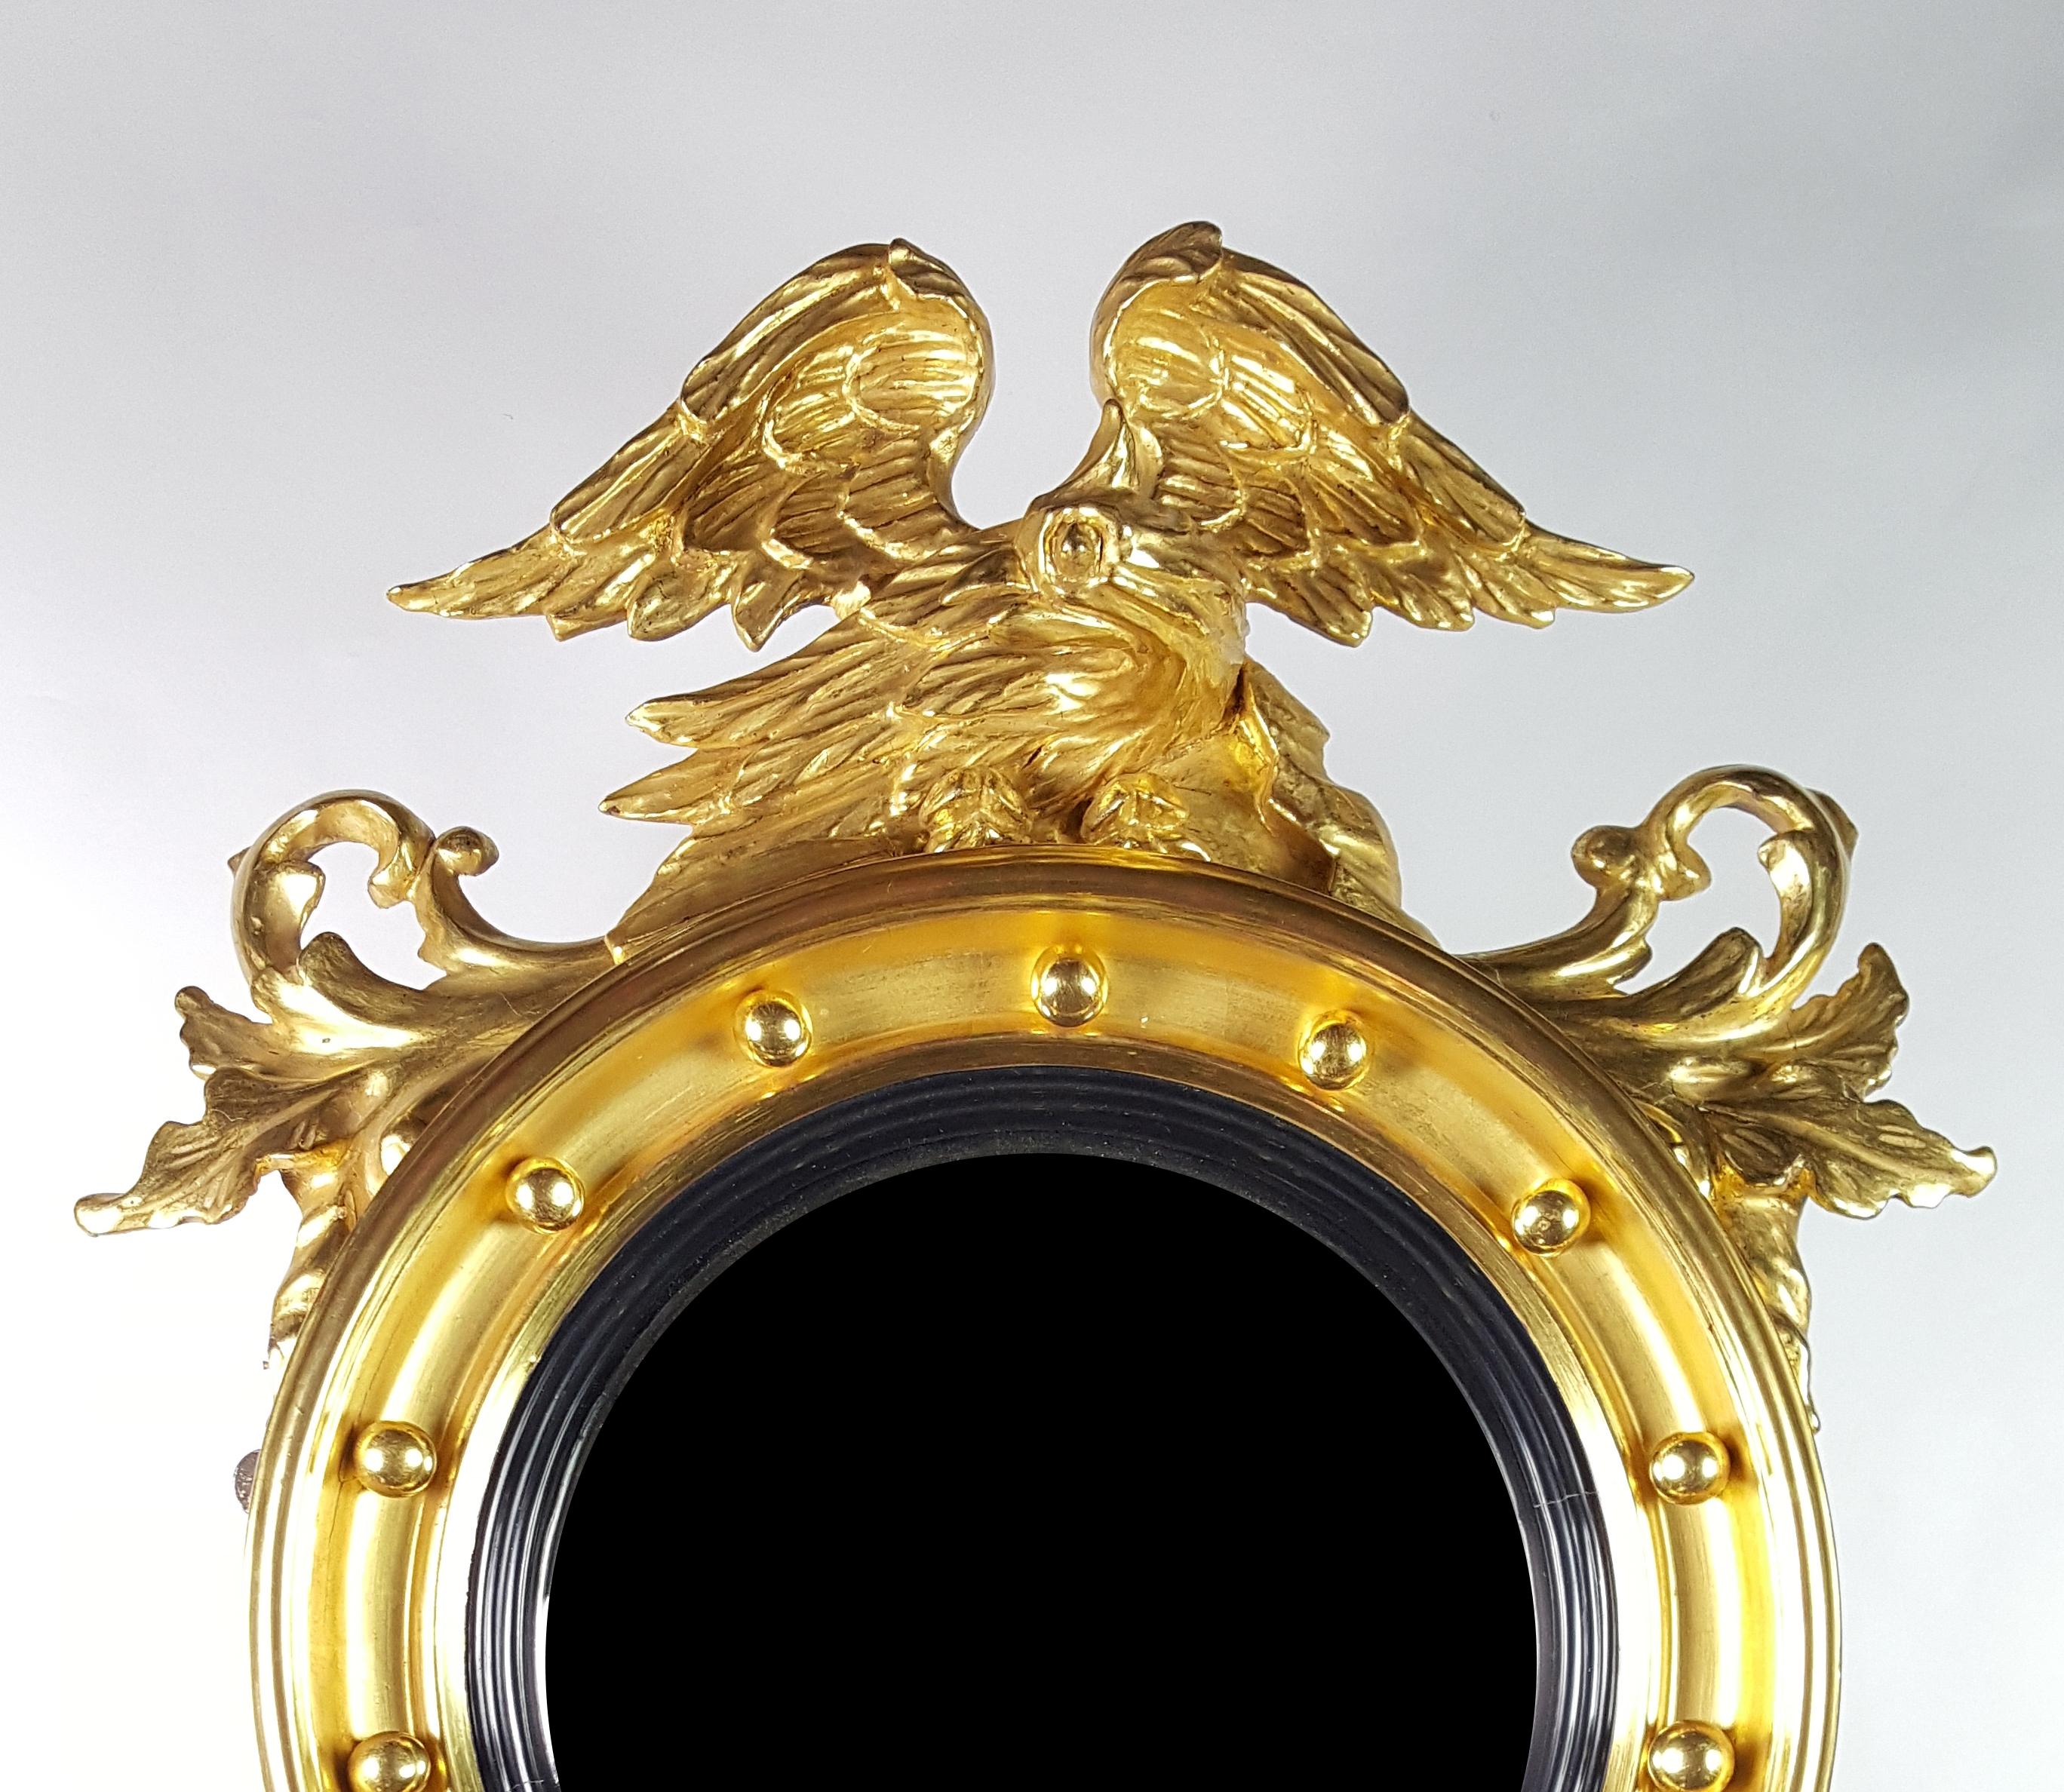 Gilded Federal American Eagle Convex Mirror, circa 1820
Gilded wood and gesso
Mirror diameter: 11 1/4 inches
Overall measurement: 29 1/2 x 21 1/2 inches (on the wall)

This console mirror It is constructed of wood and gesso and gilded. On top